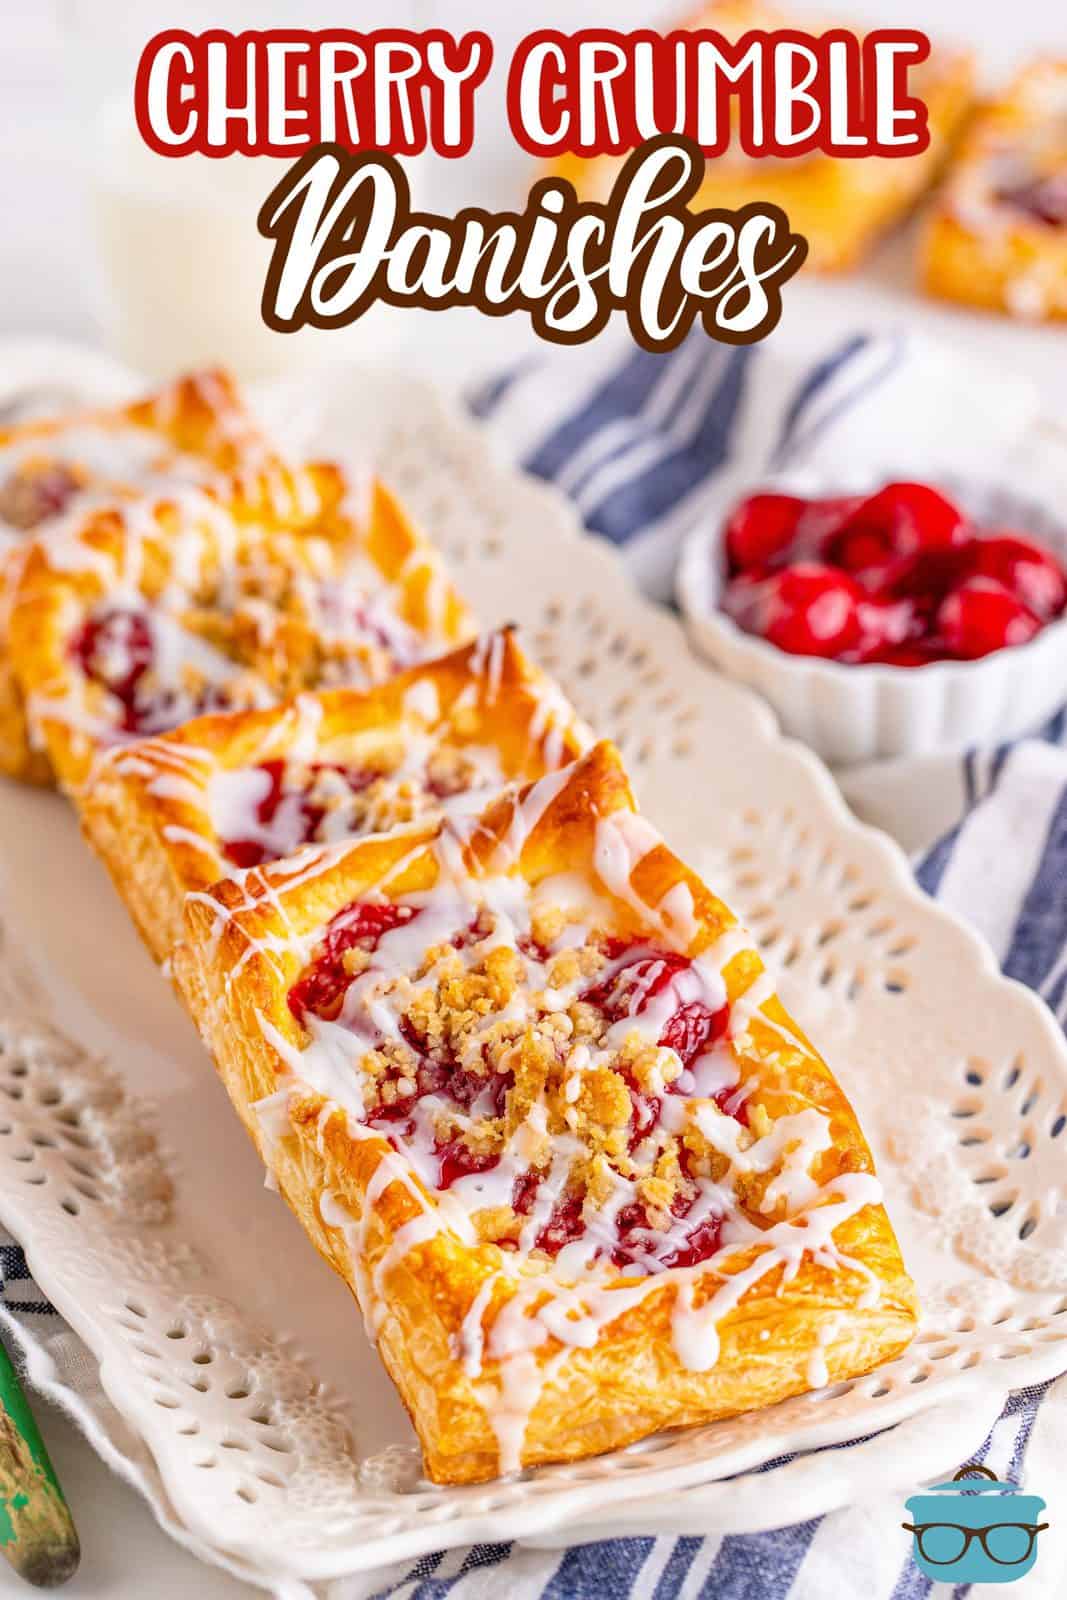 Pinterest image of layered Cherry Crumble Danishes on white plater.